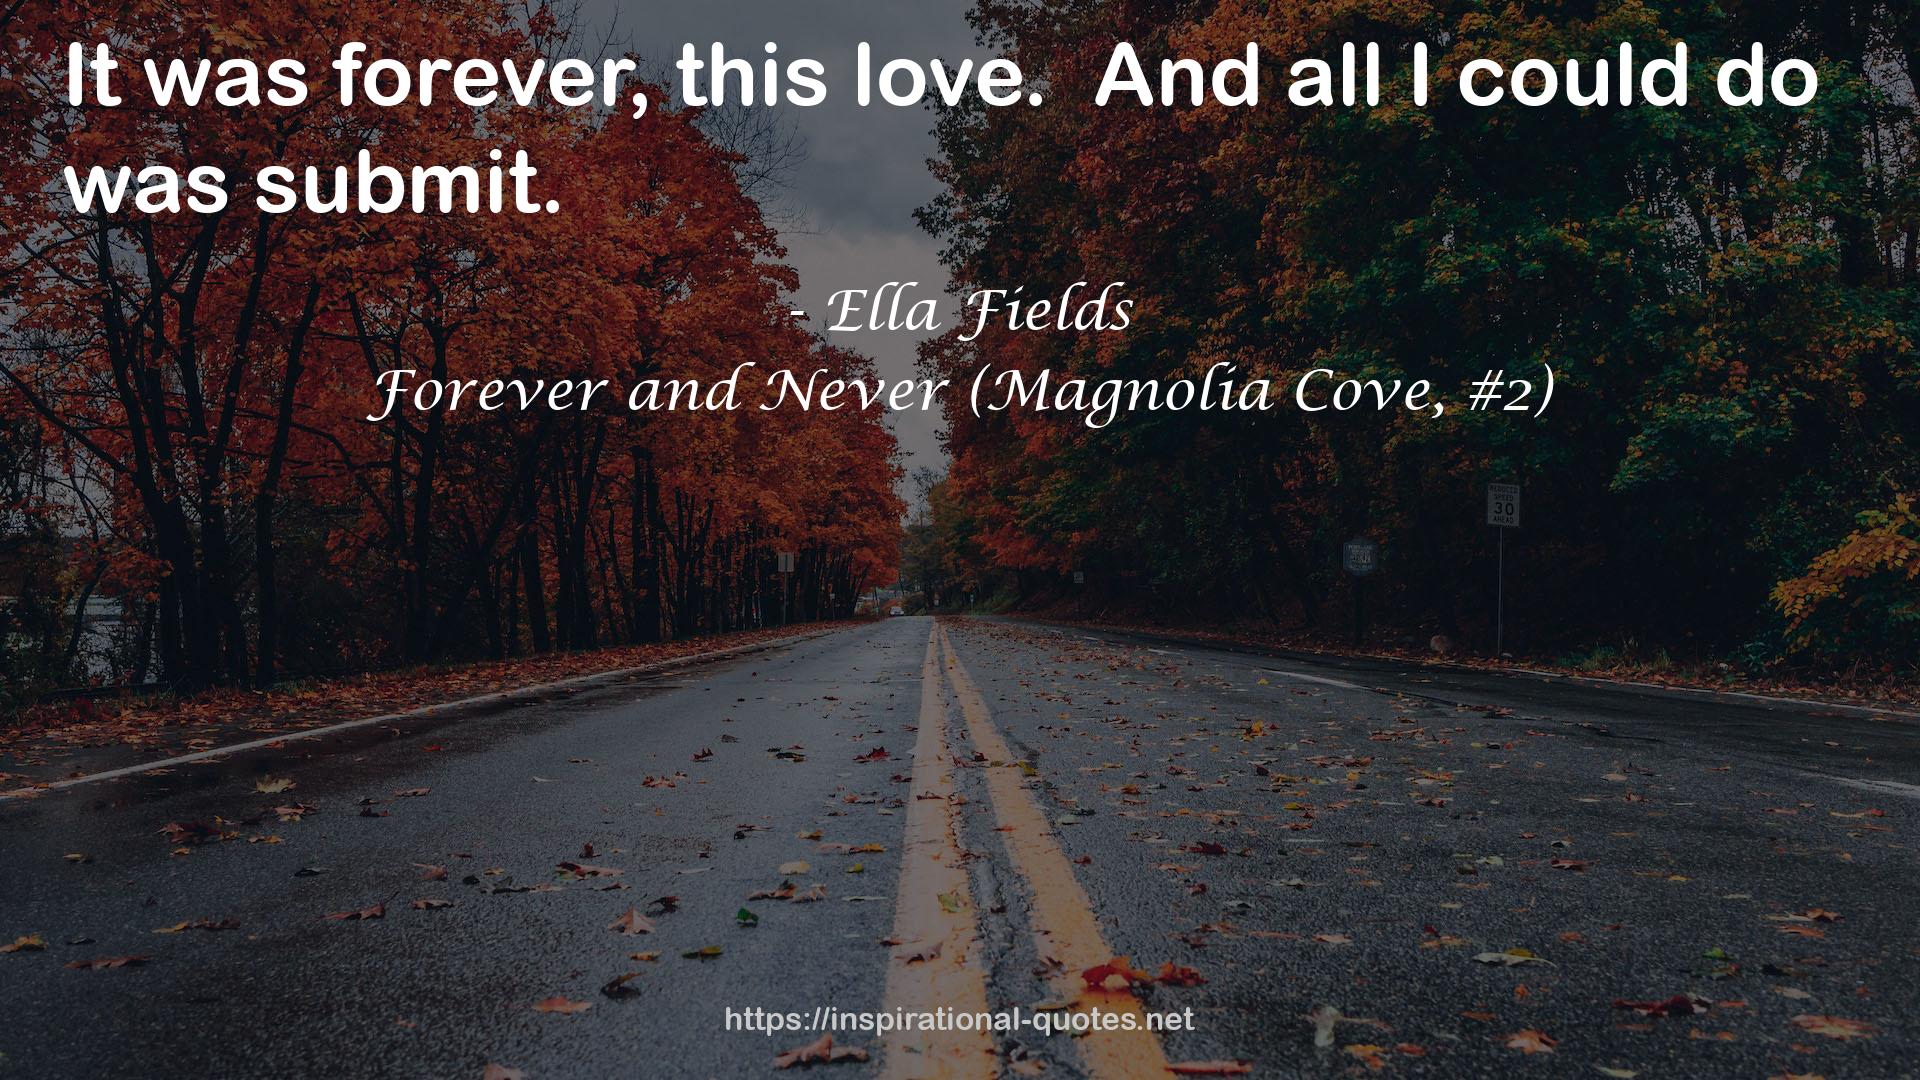 Forever and Never (Magnolia Cove, #2) QUOTES